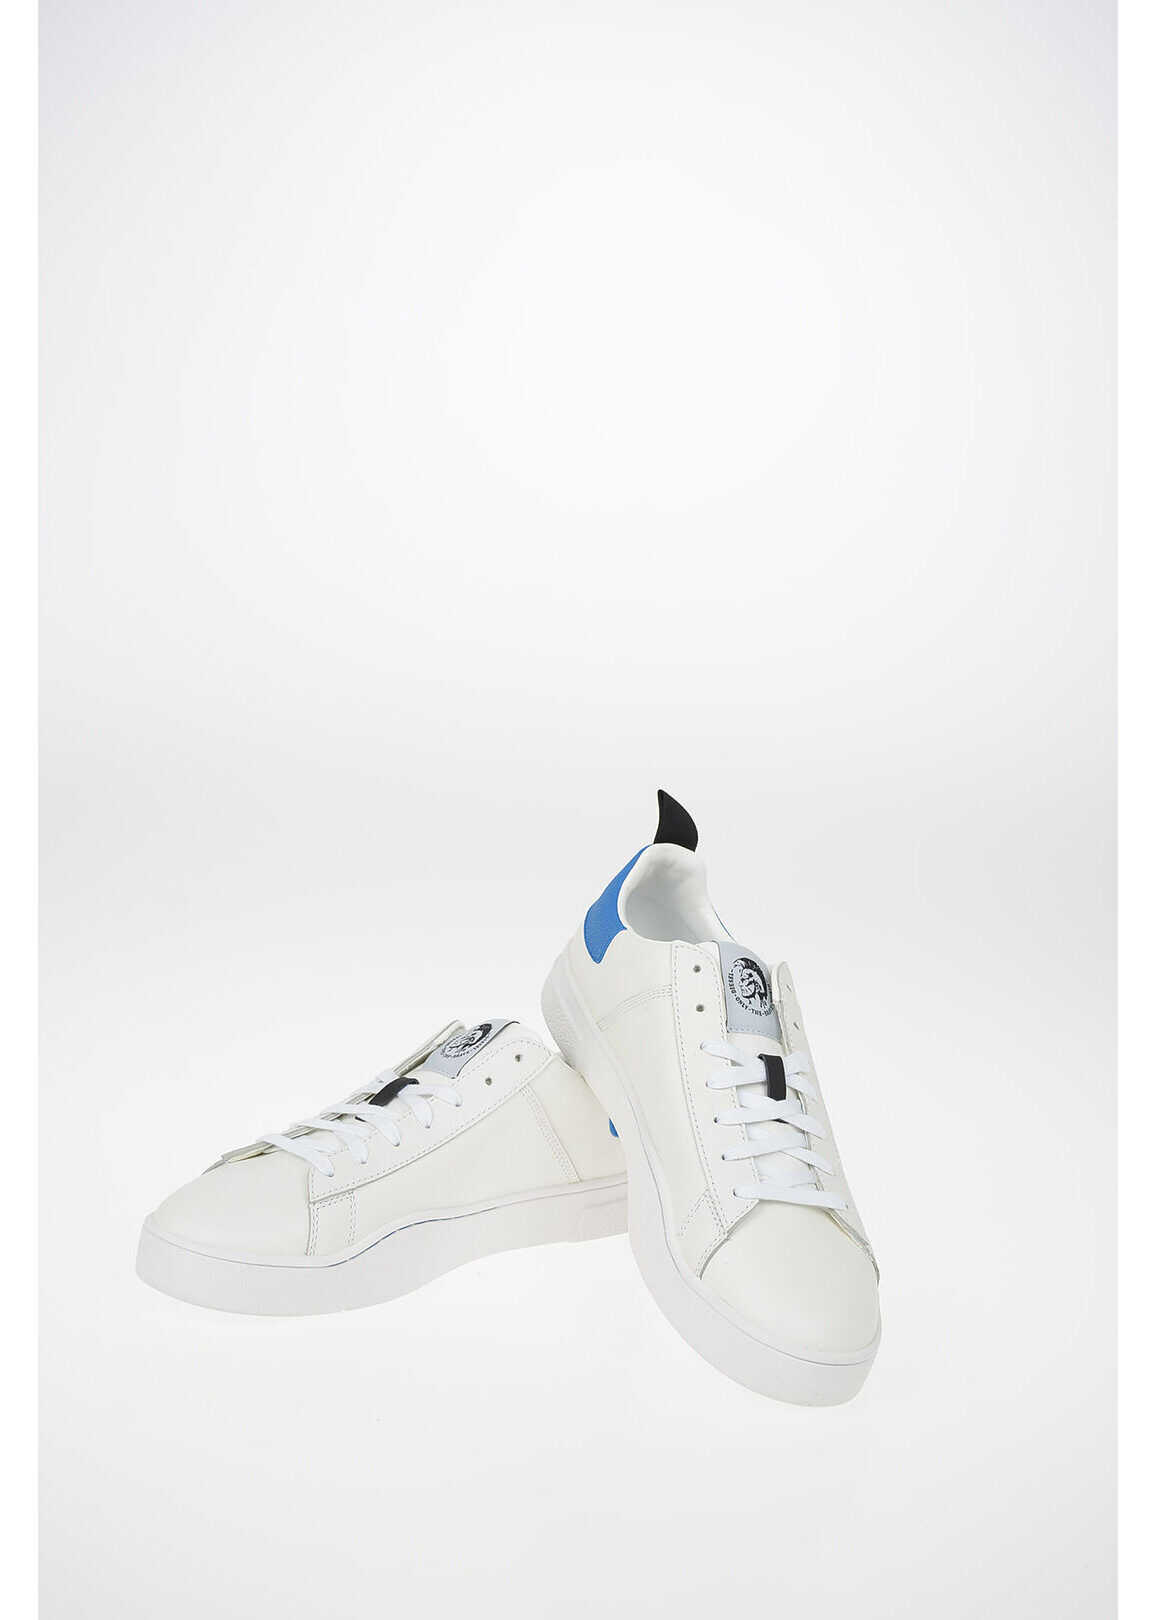 Diesel Leather CLEVER Sneakers WHITE